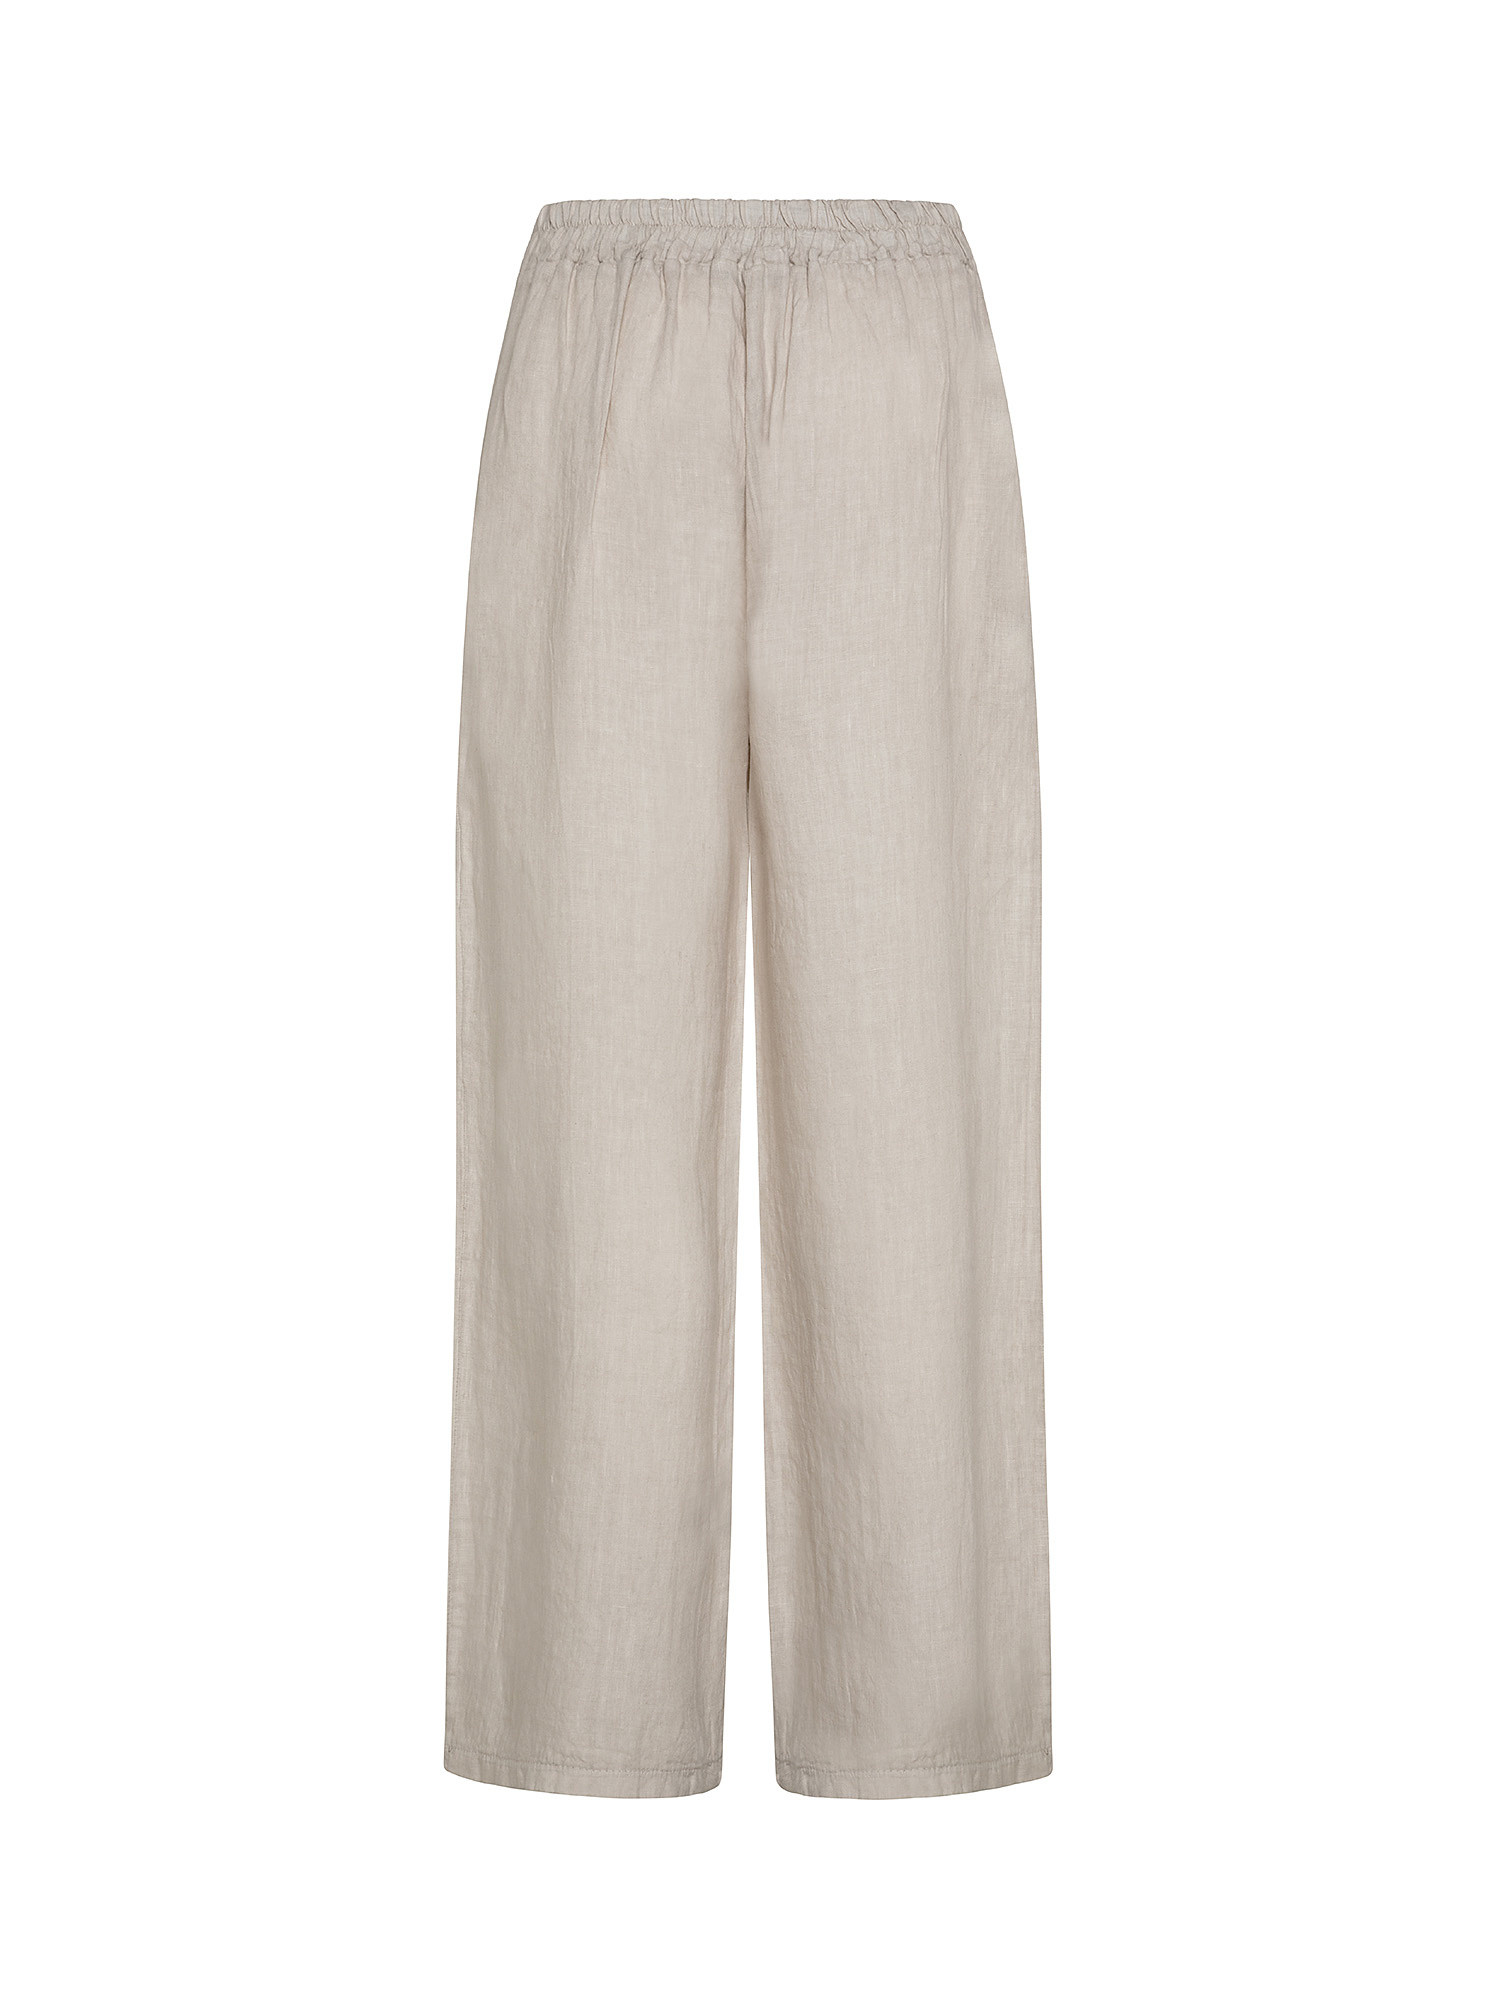 Wide pure linen trousers, Beige, large image number 1